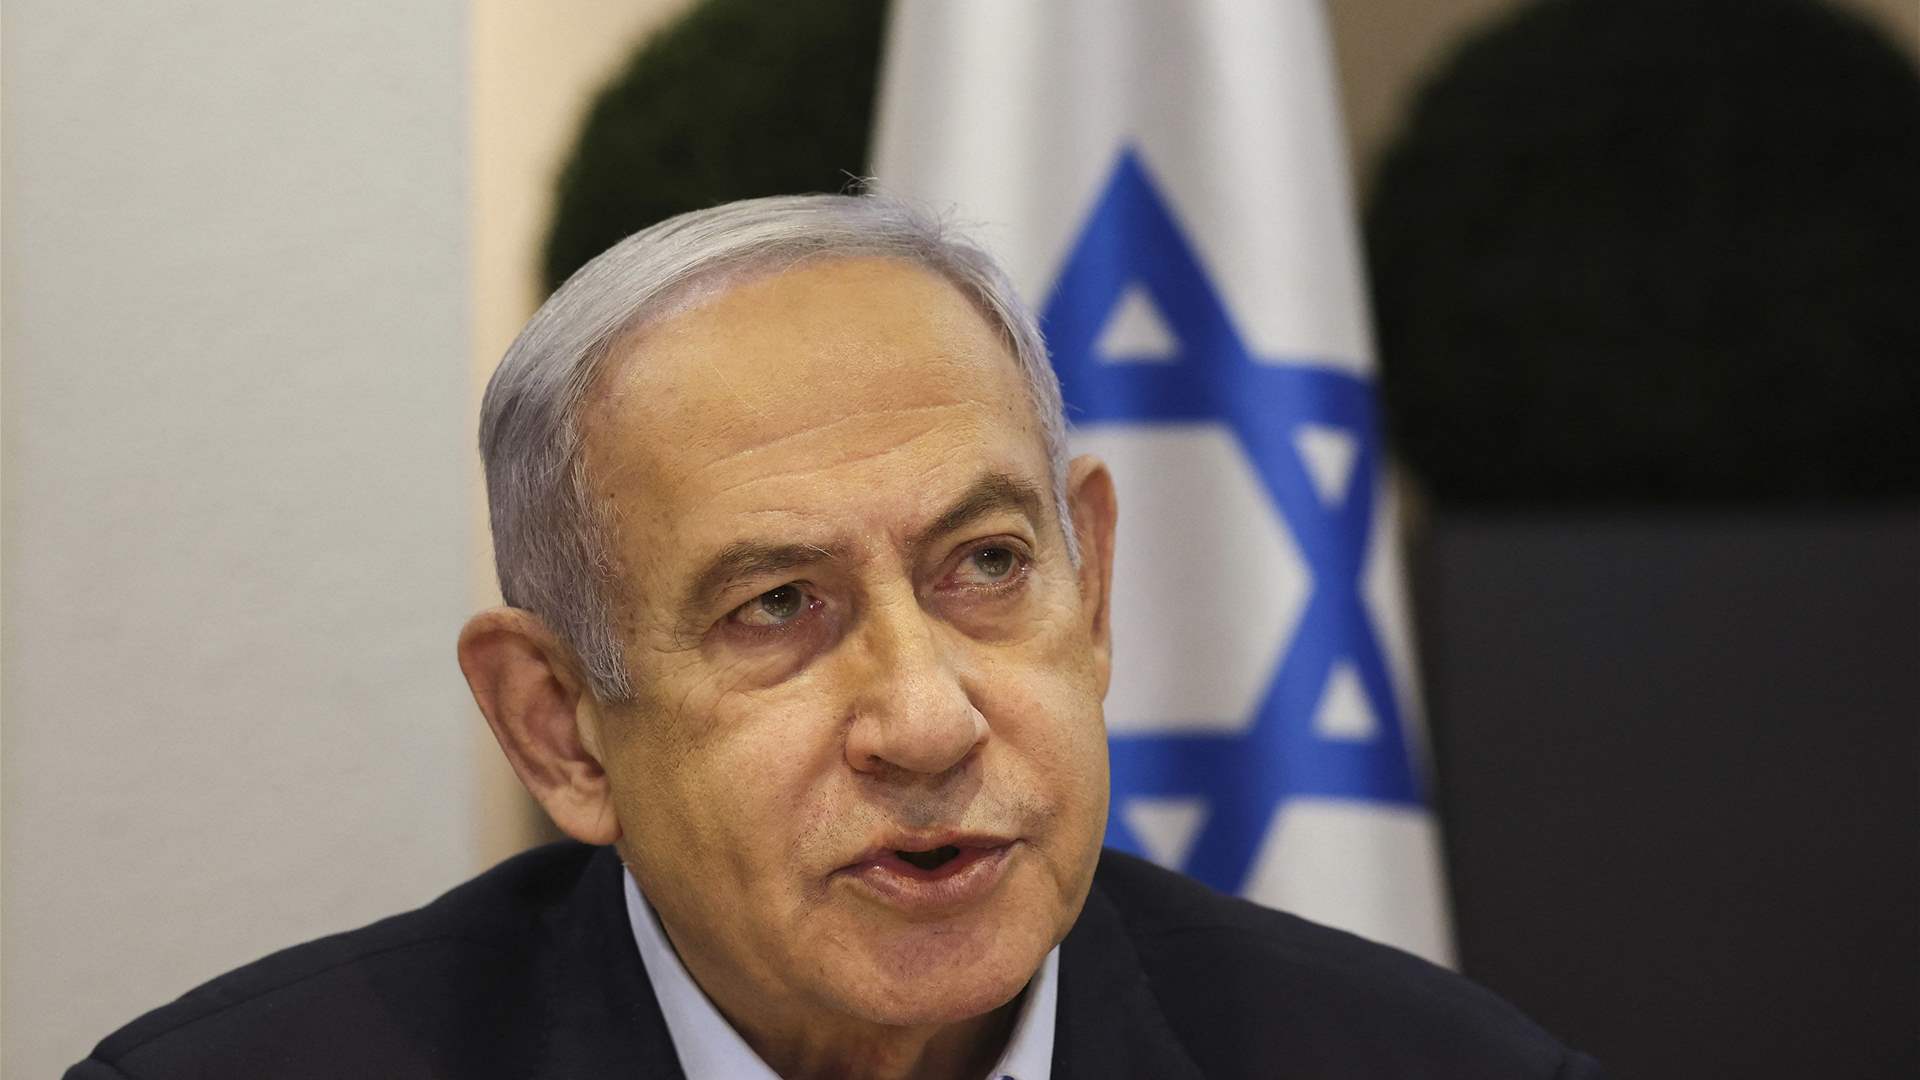 Netanyahu Faces Internal Division and Northern Uncertainty Amid Lebanon War Threat